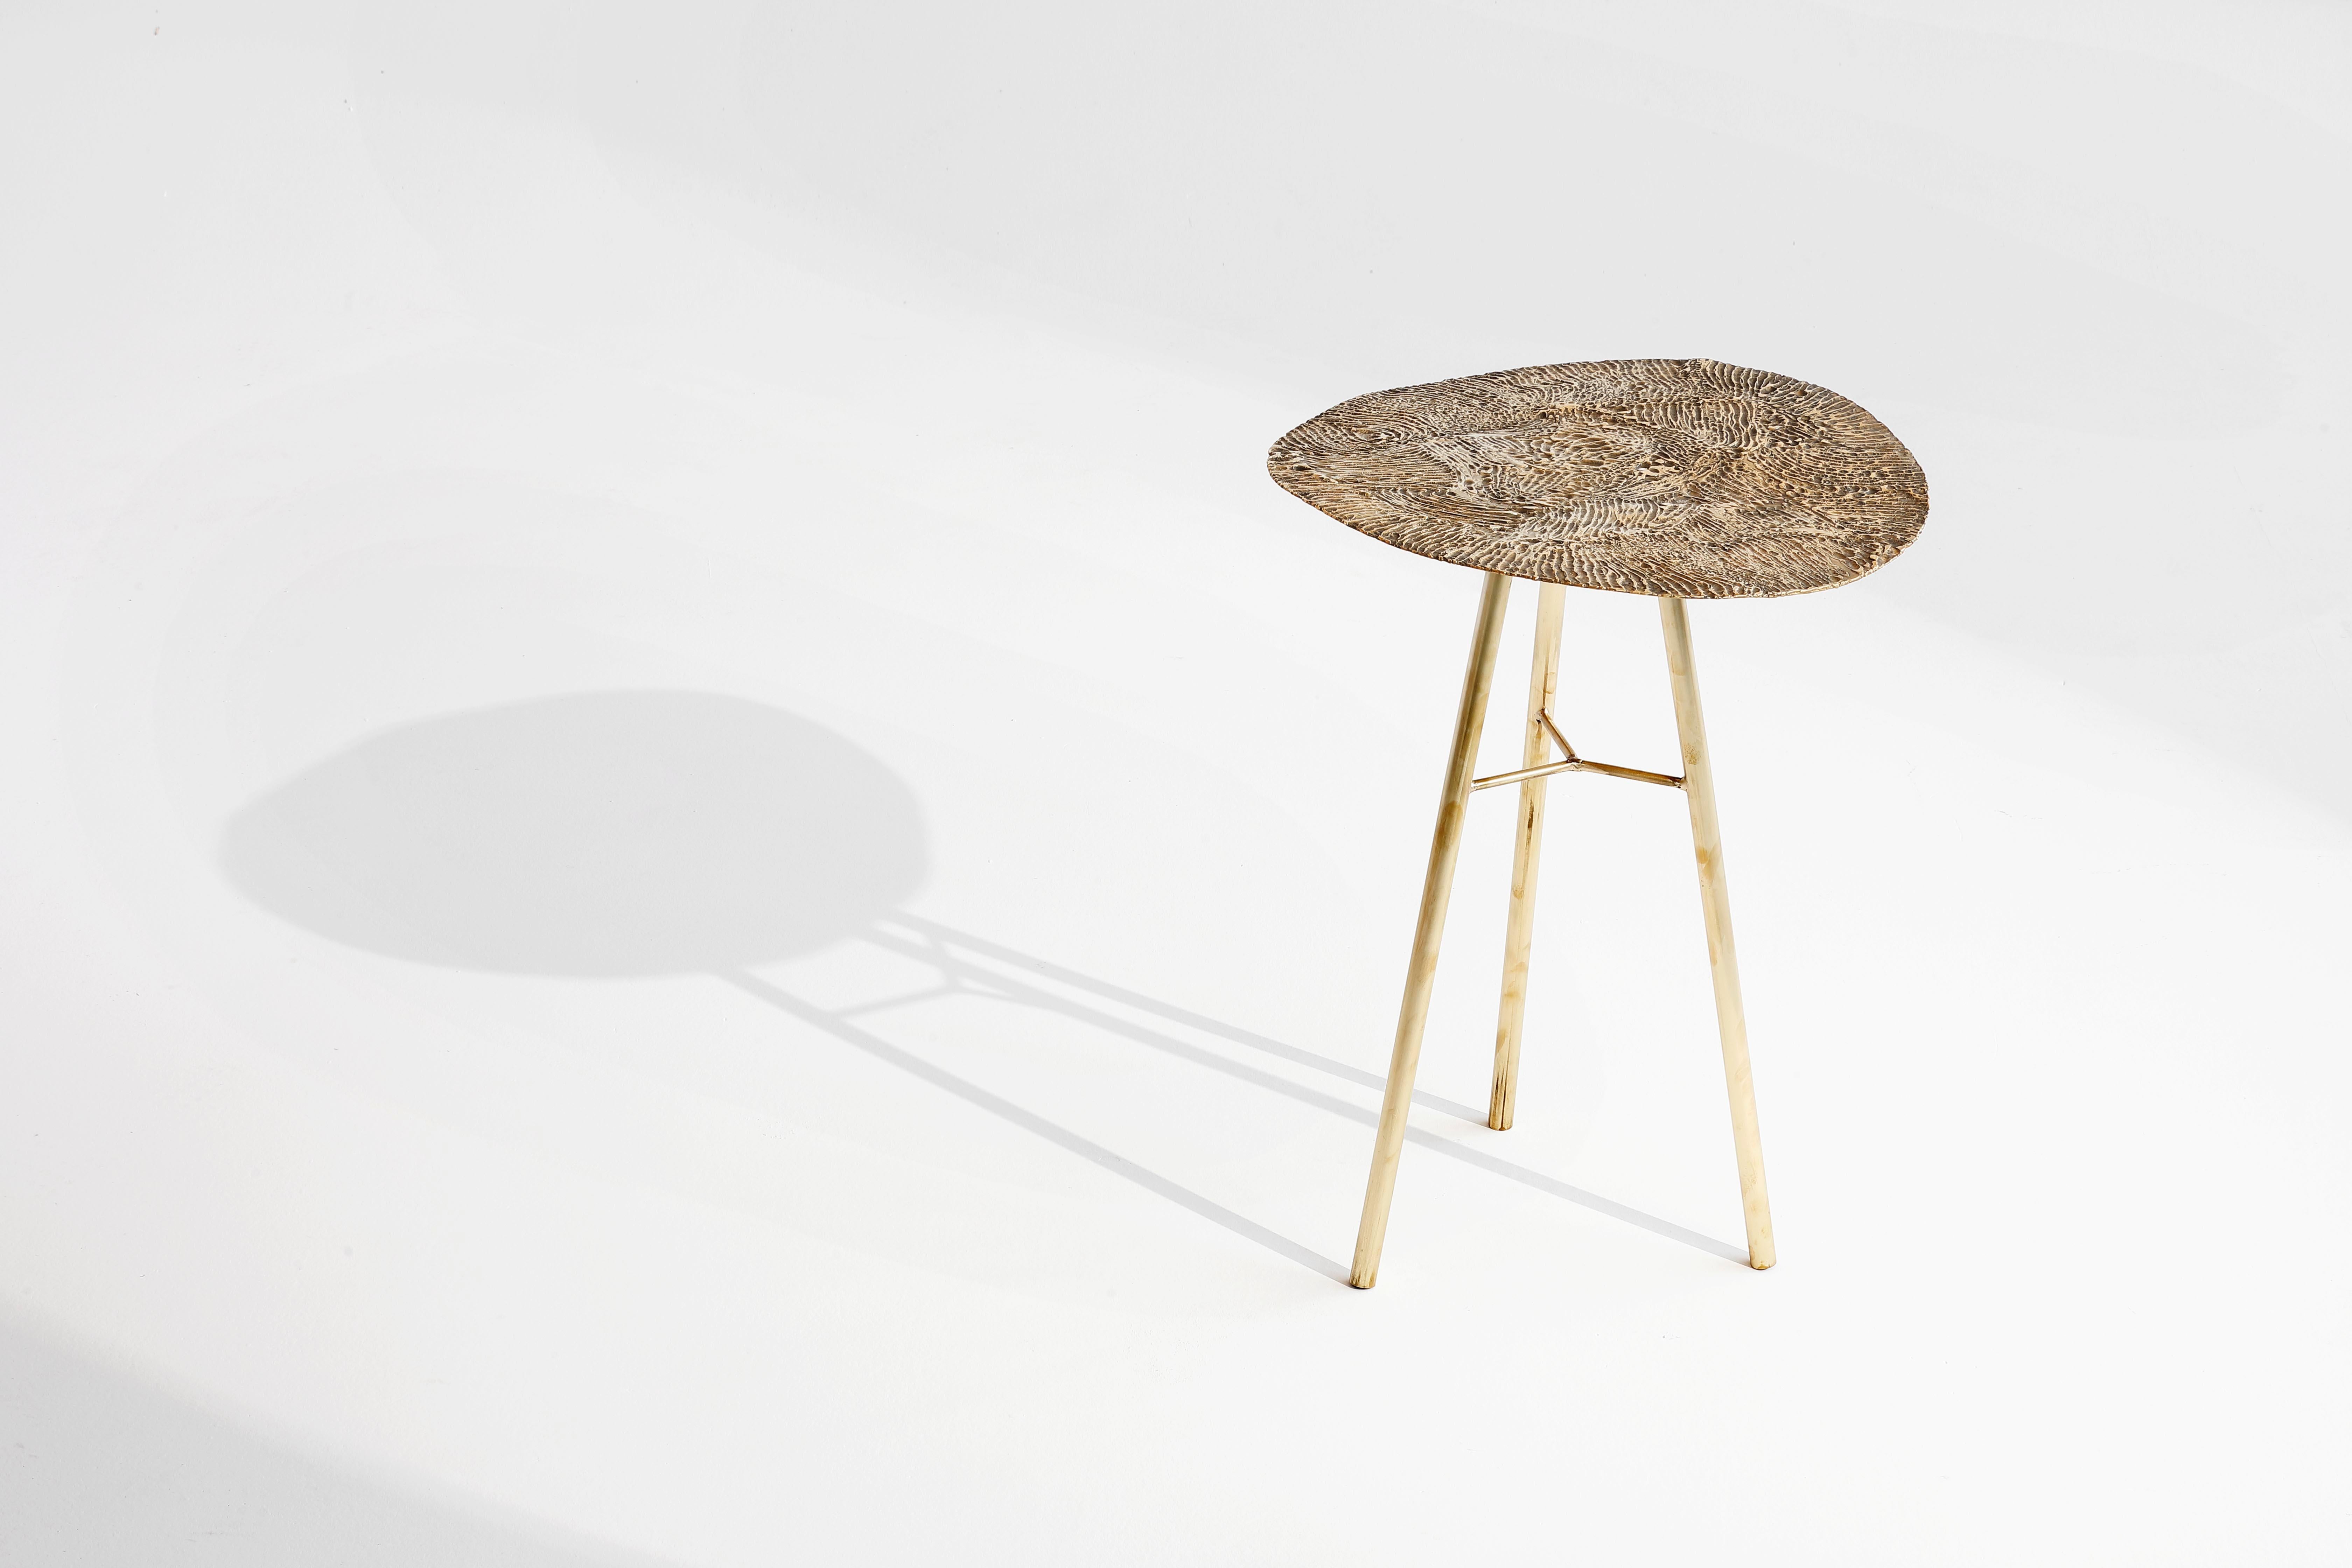 Organic Modern Brass Hand-Sculpted Side Table by Samuel Costantini